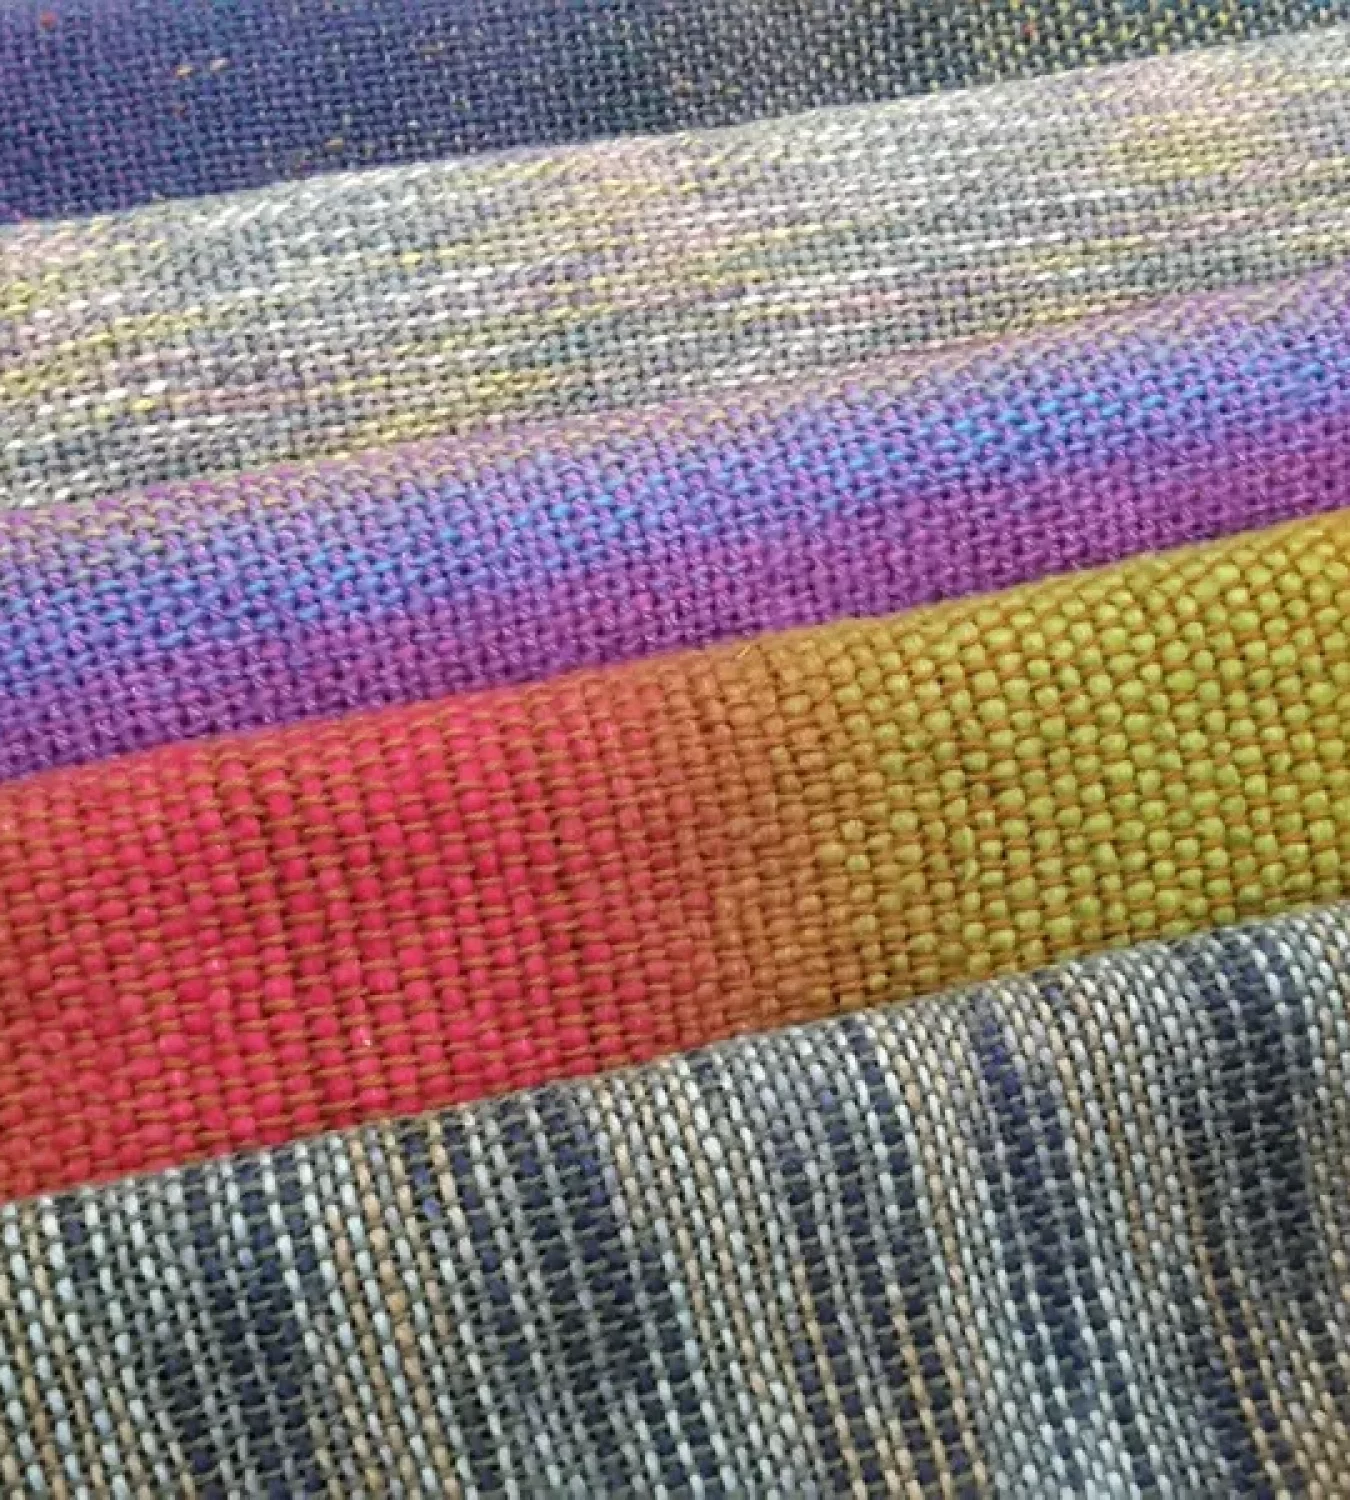 Weave a Scarf in a Day with Anne Crowther